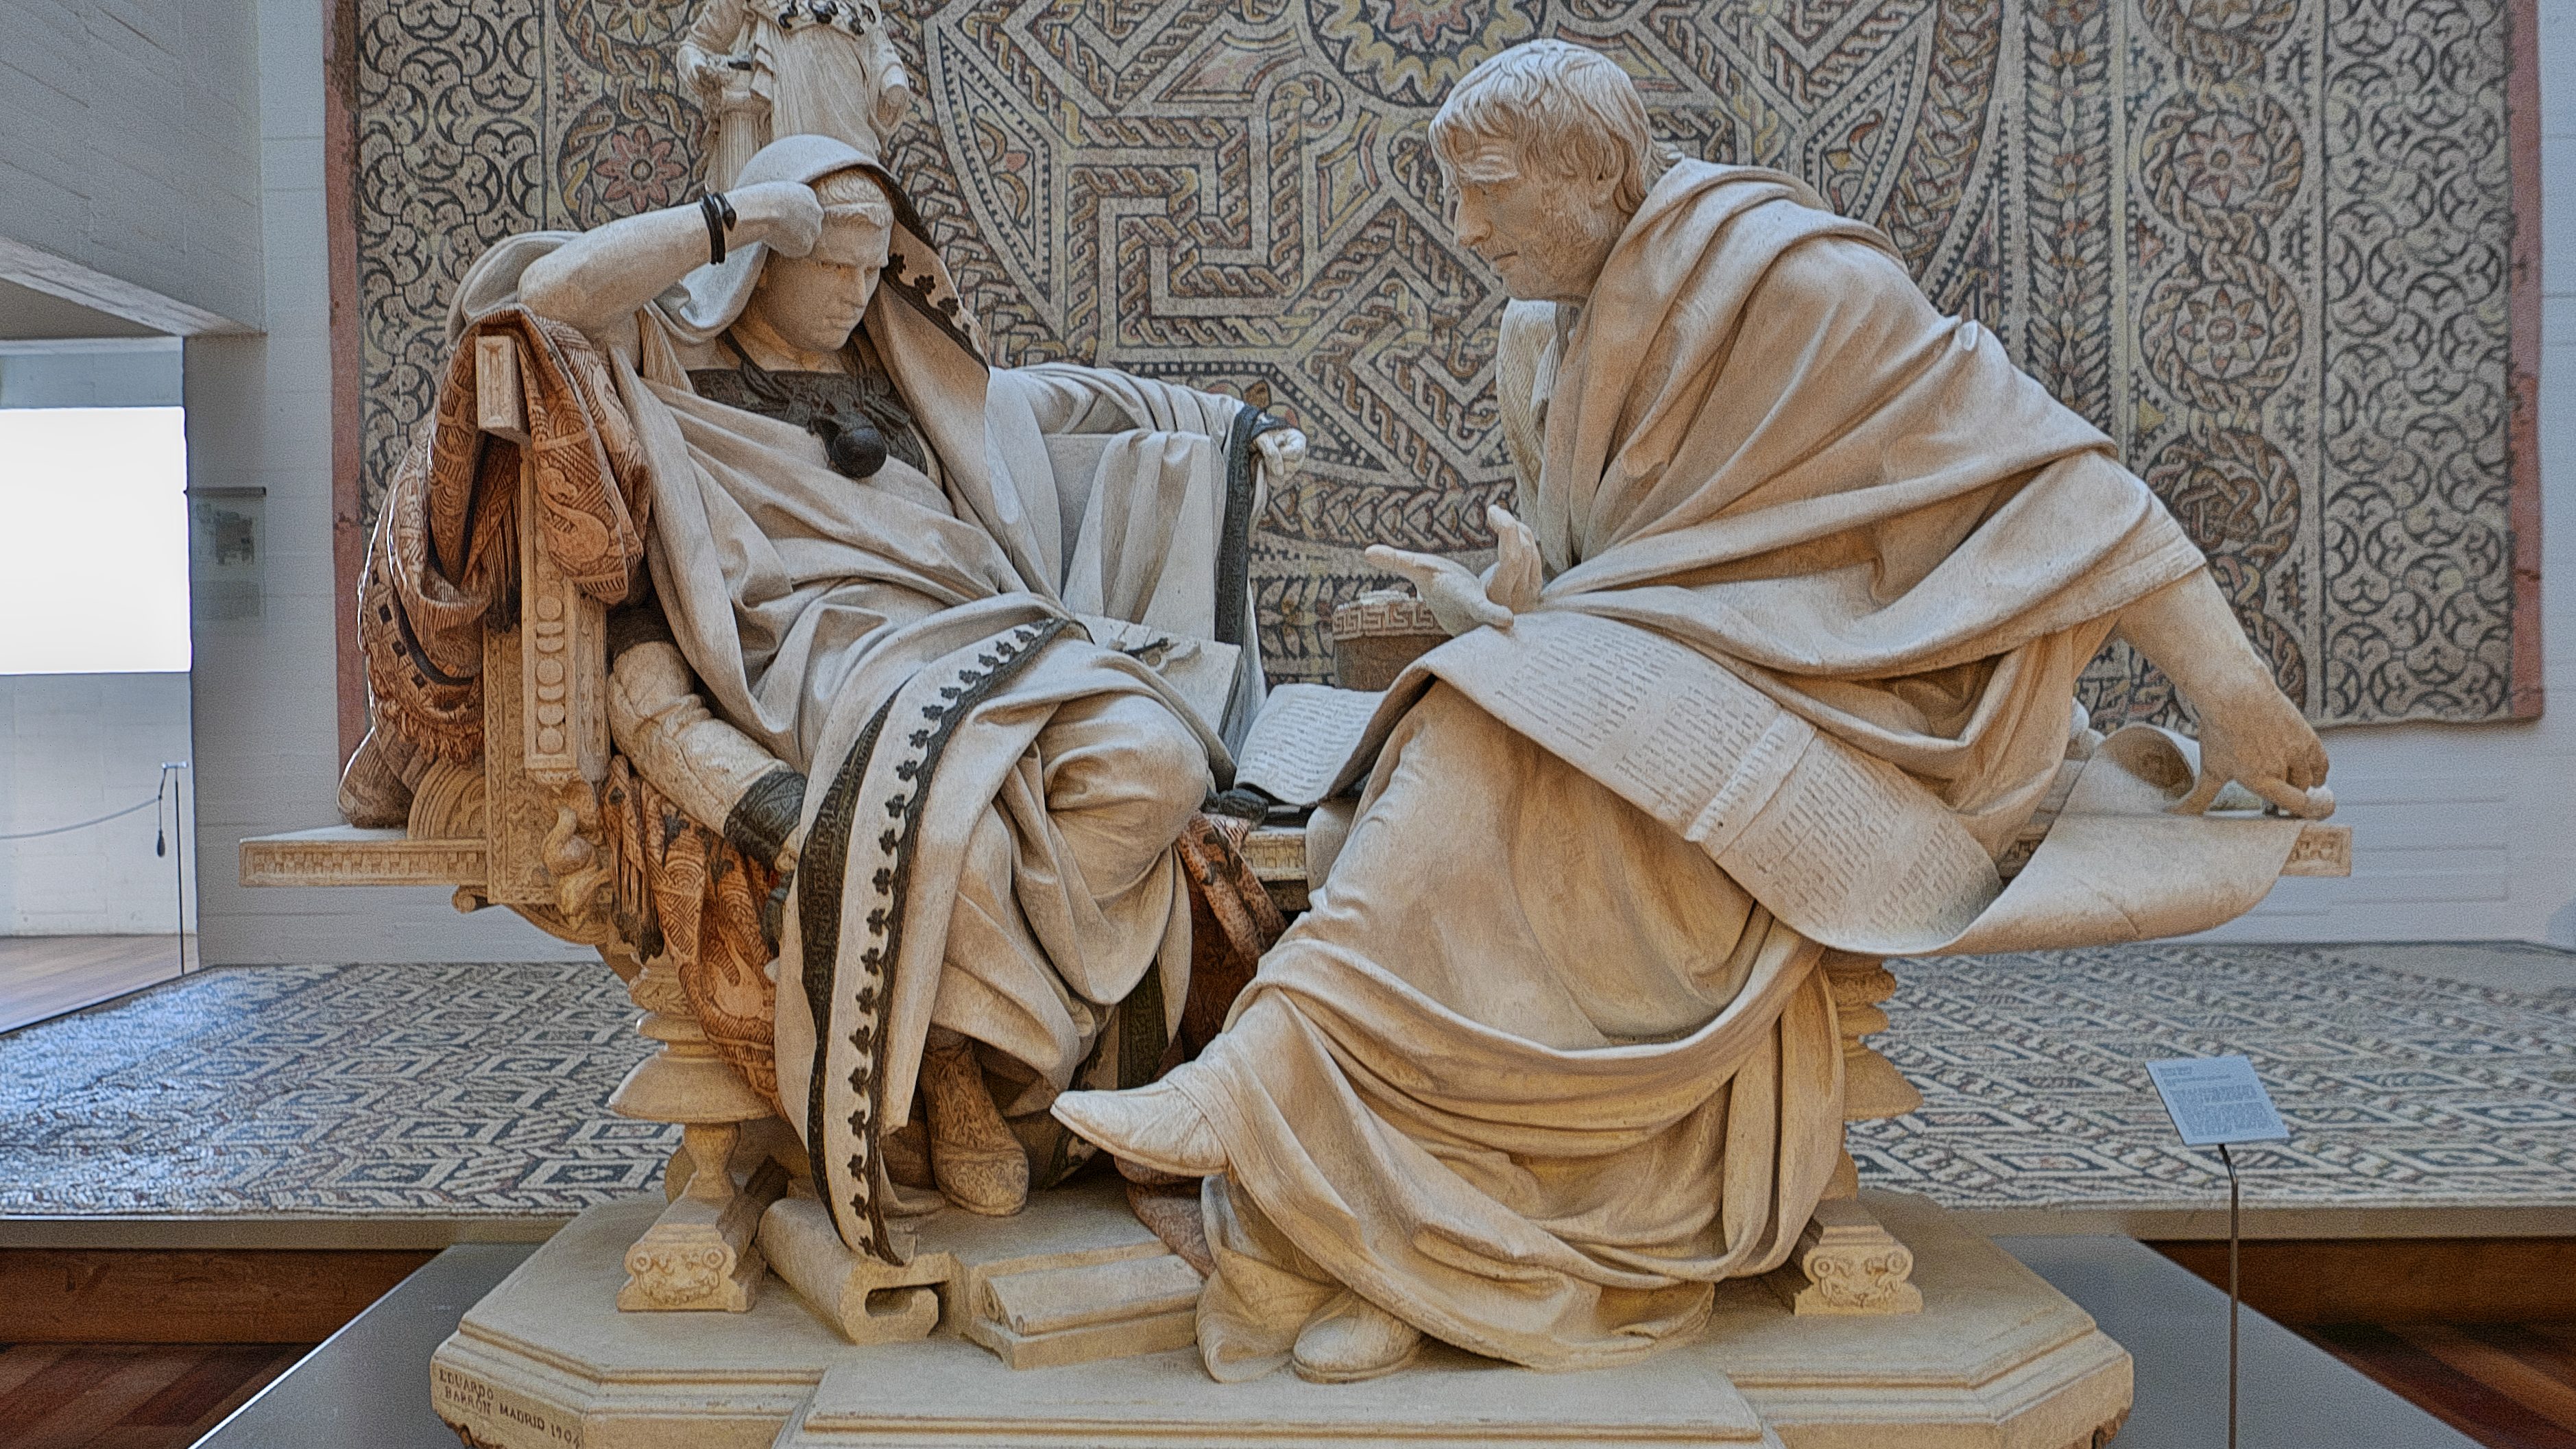 A plaster casting of Seneca and his student Nero in the presence of Minerva.